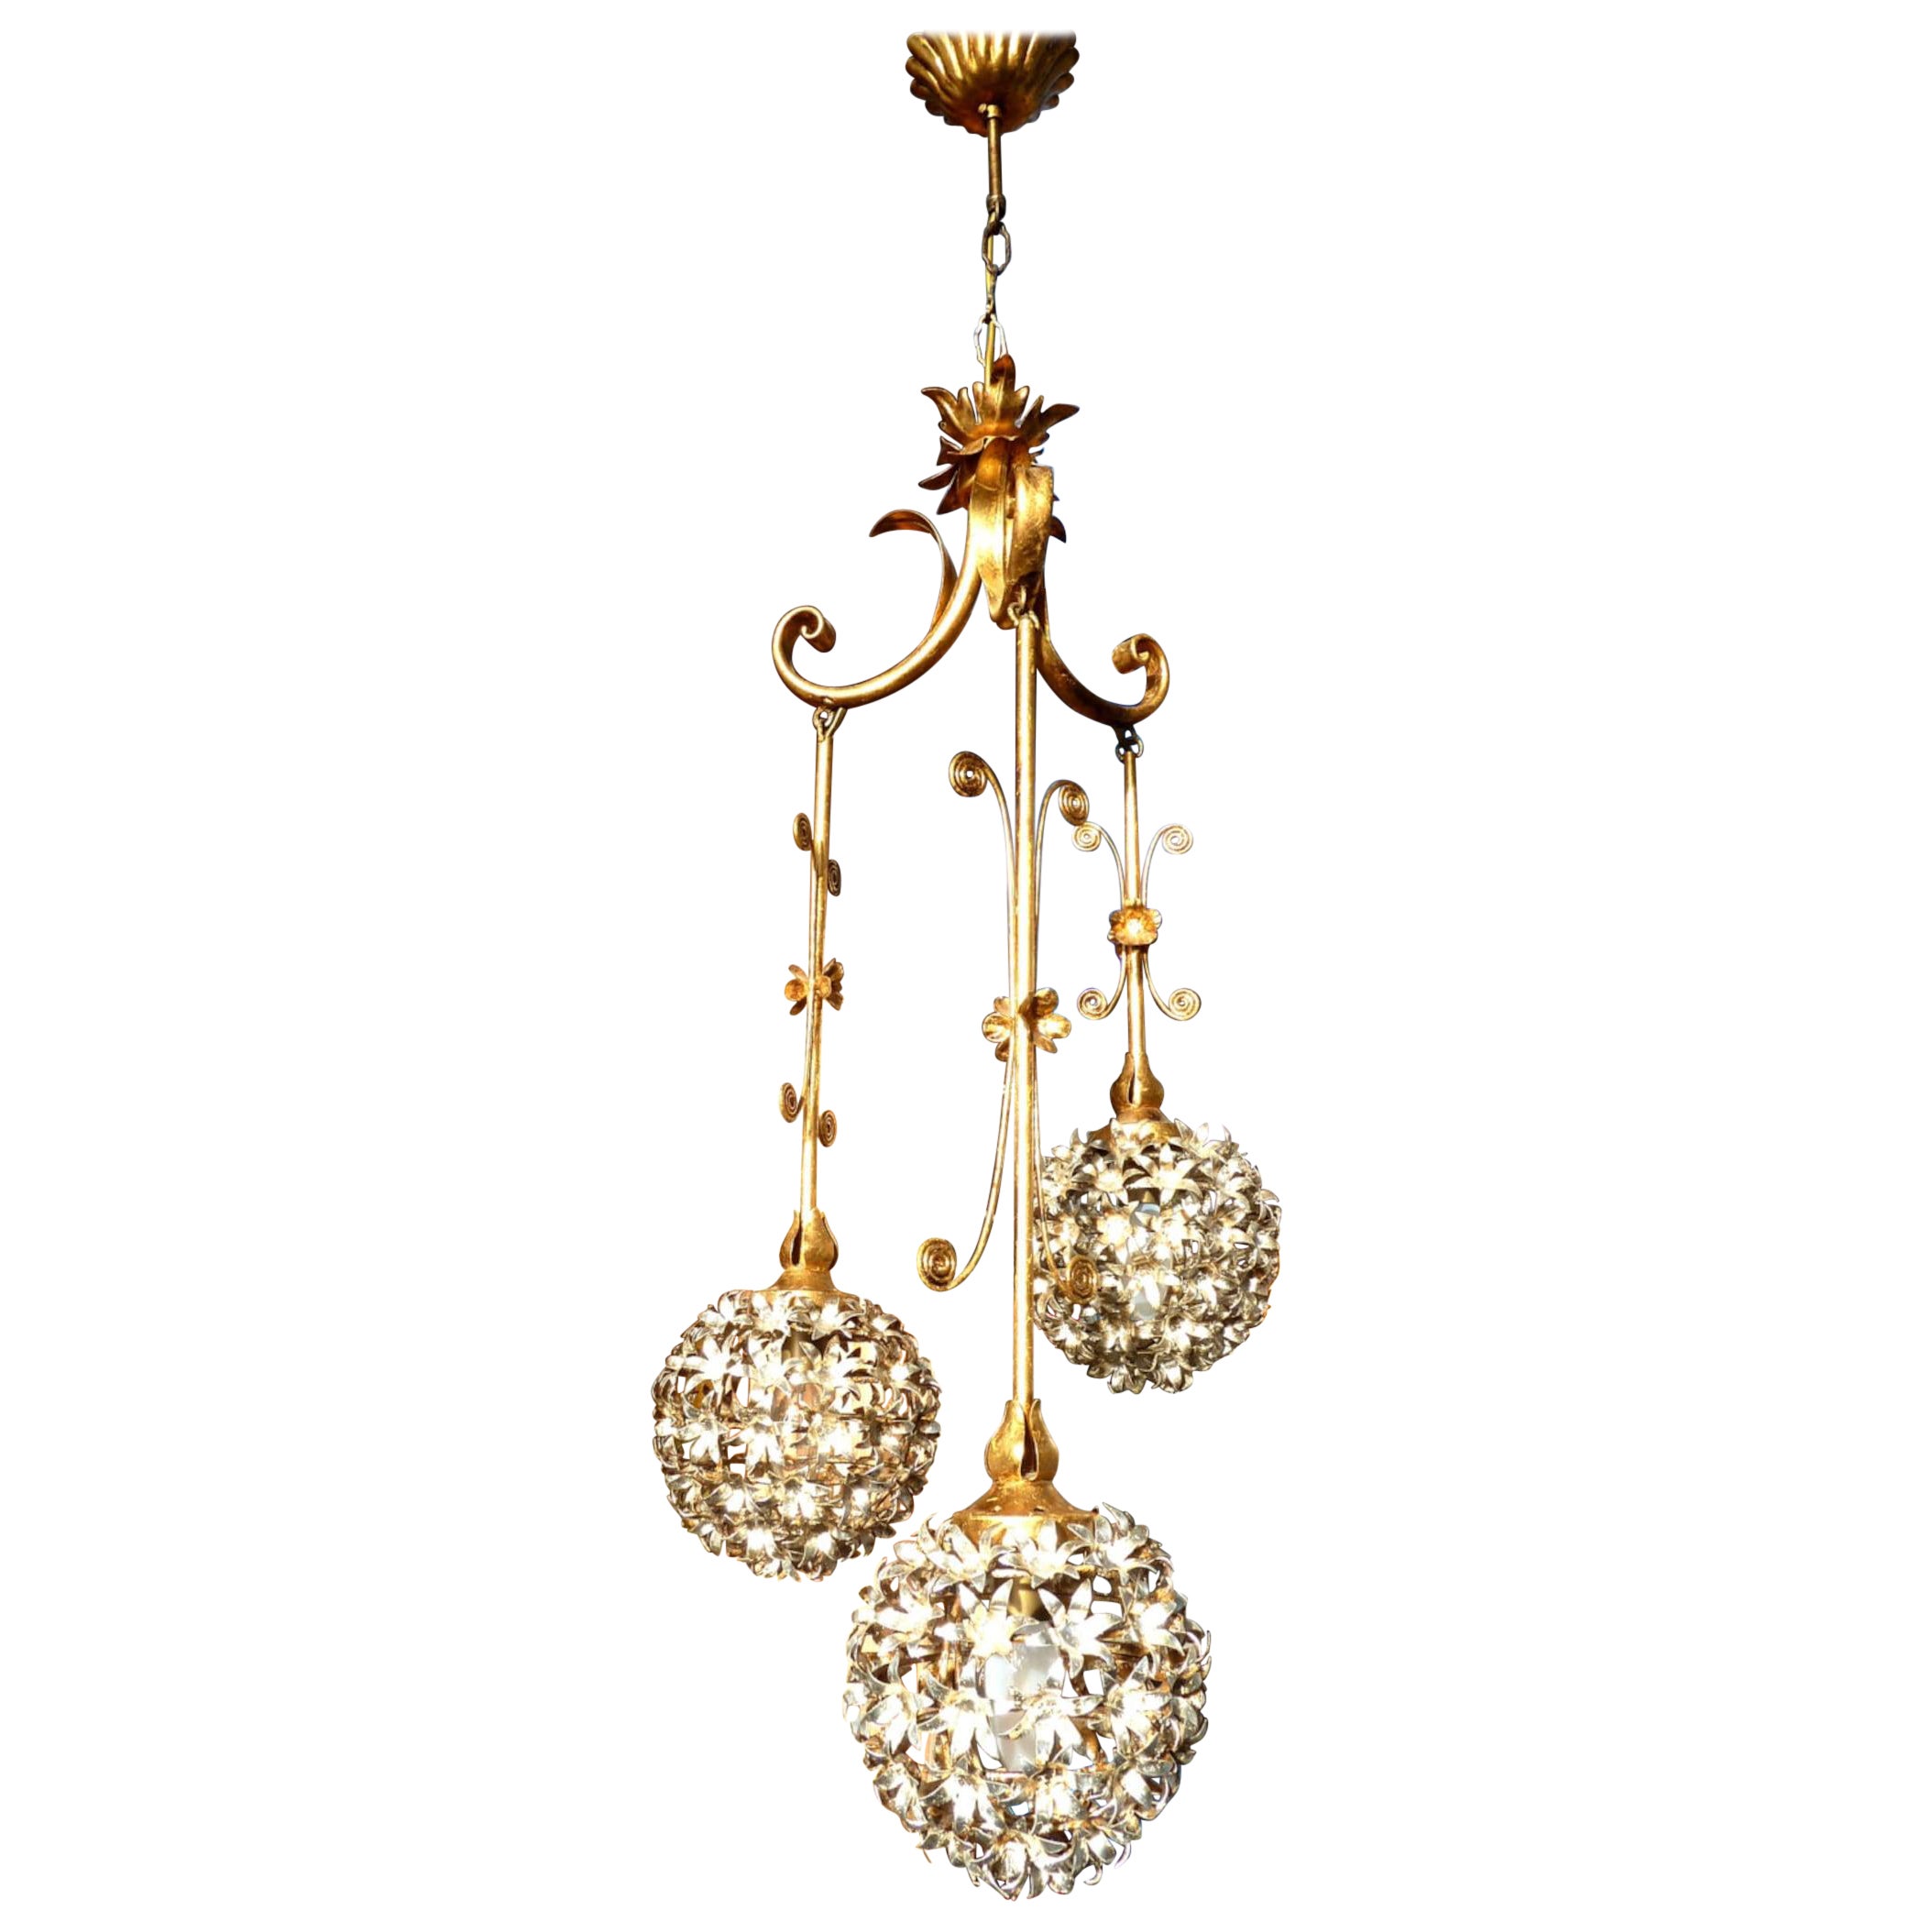 Banci Firence Gold & Silver Plated Chandelier, Italy 1950s